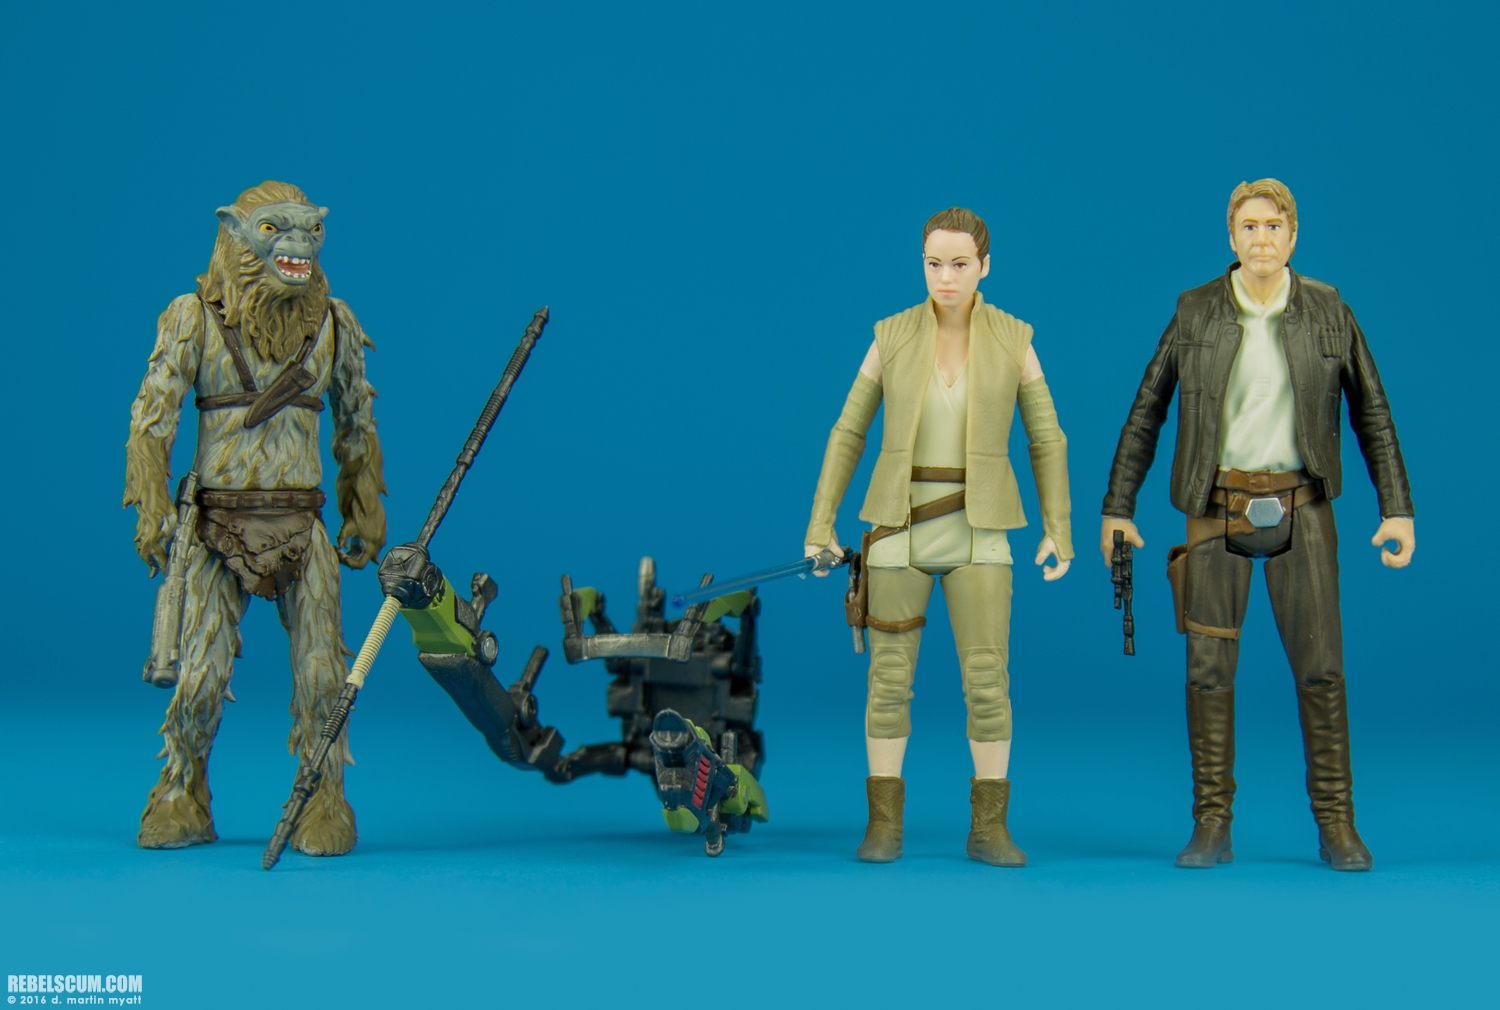 Rey-Resistance-Outfit-The-Force-Awakens-2016-Hasbro-019.jpg